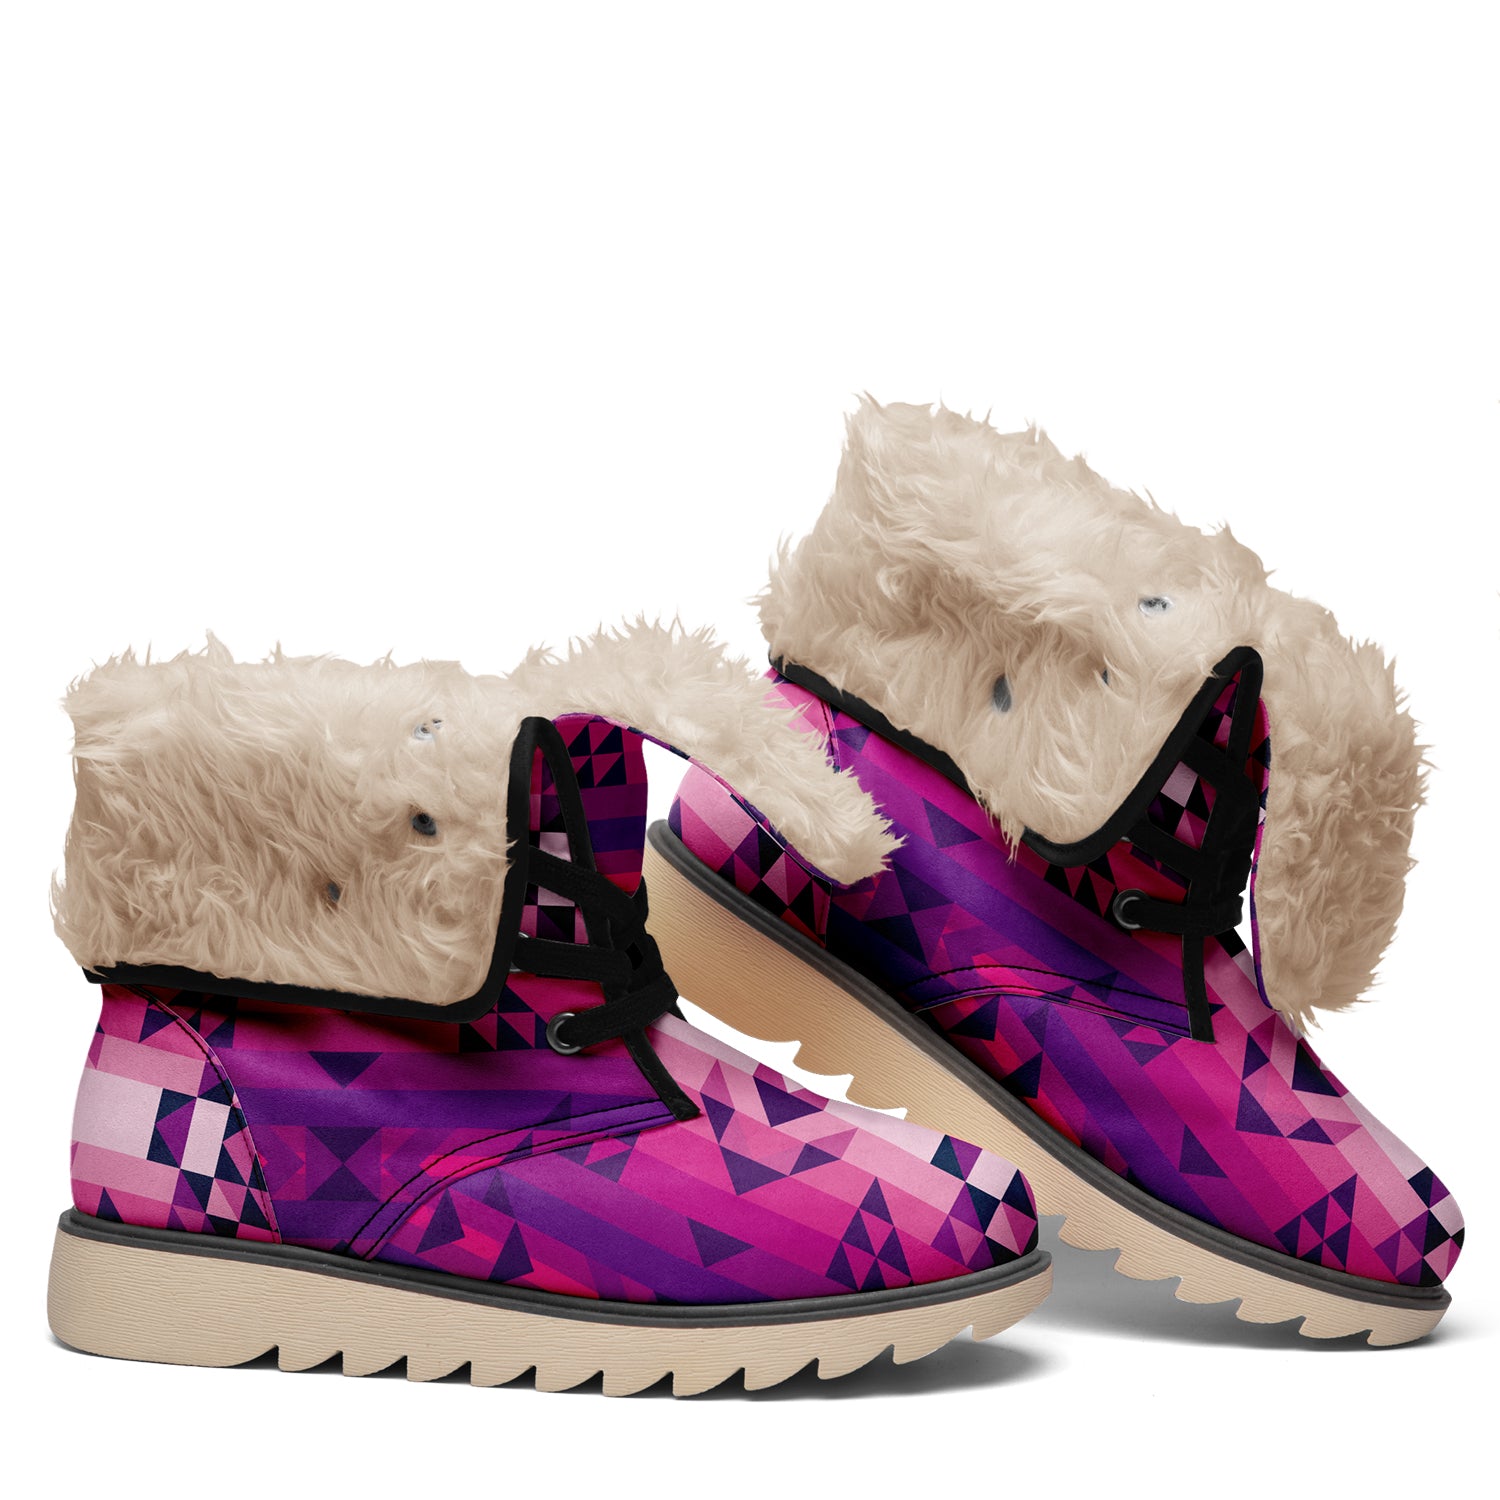 Royal Airspace Polar Winter Boots